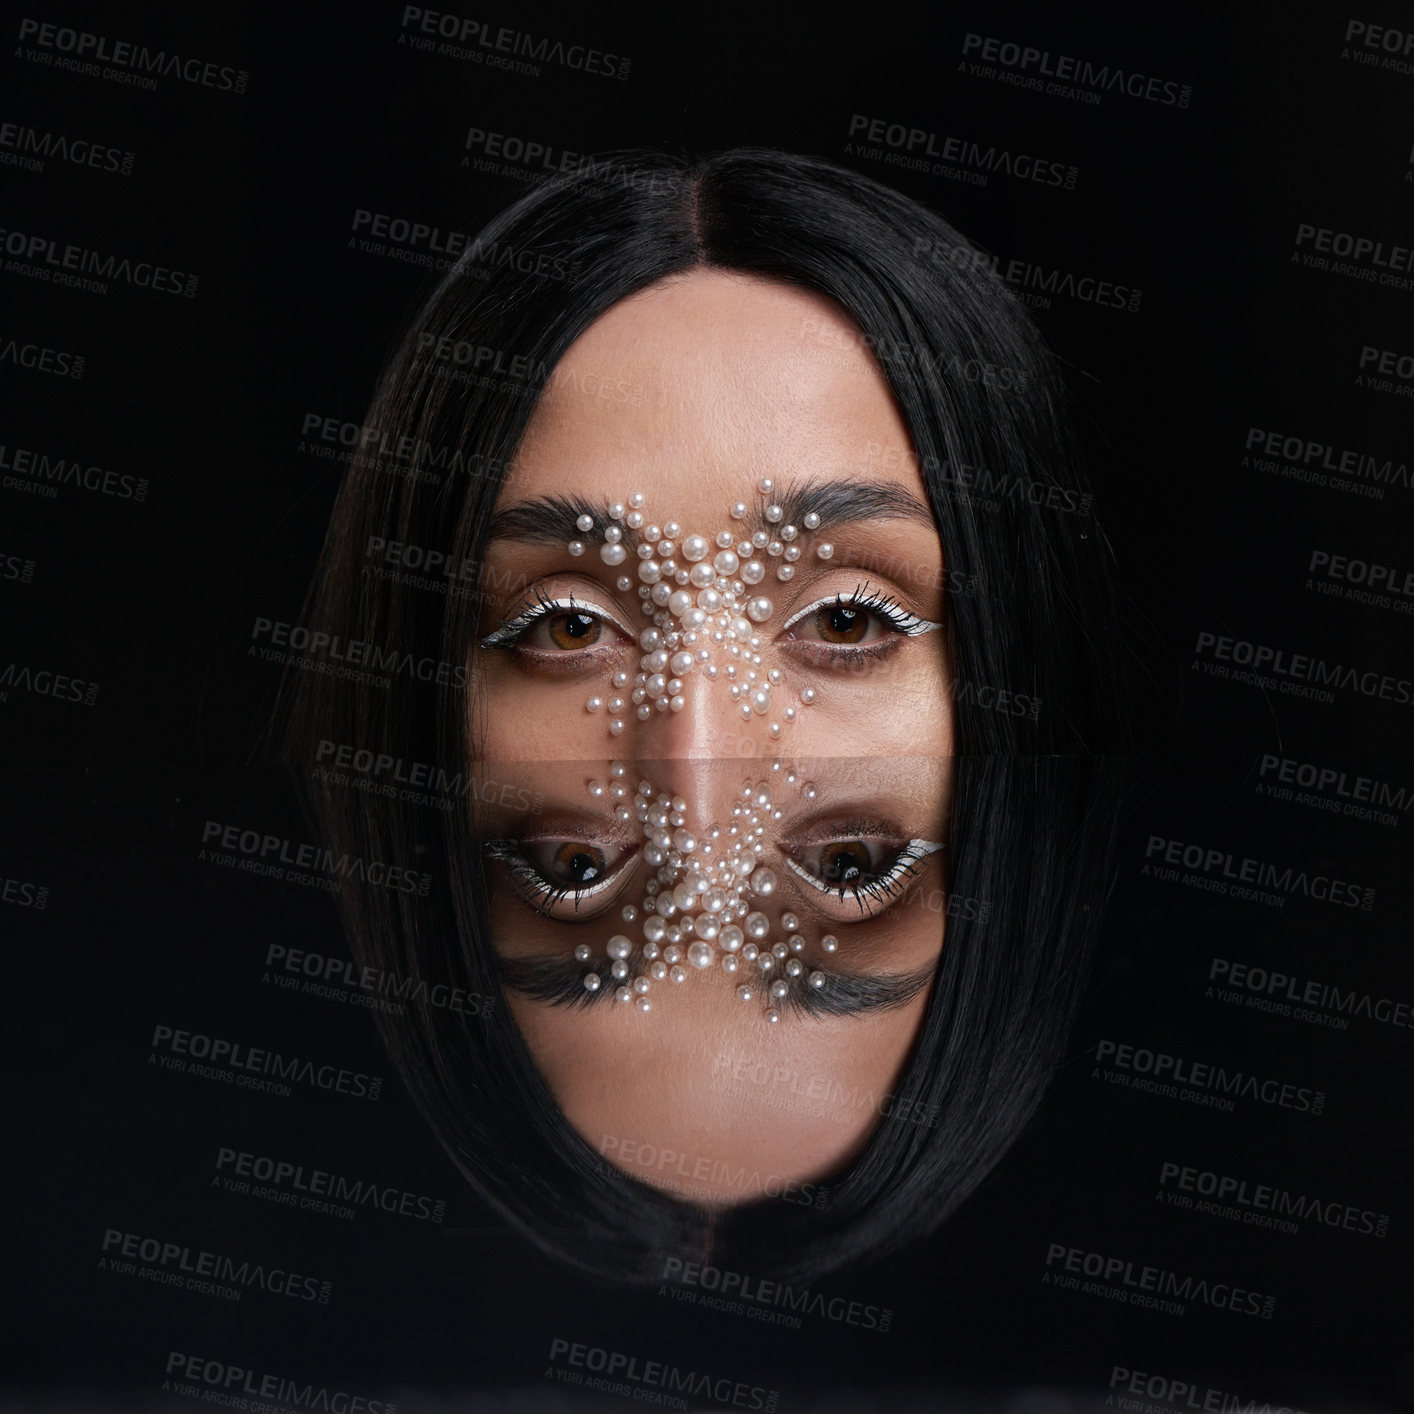 Buy stock photo Studio portrait of a beautiful young woman with pearls on her face posing against a black background